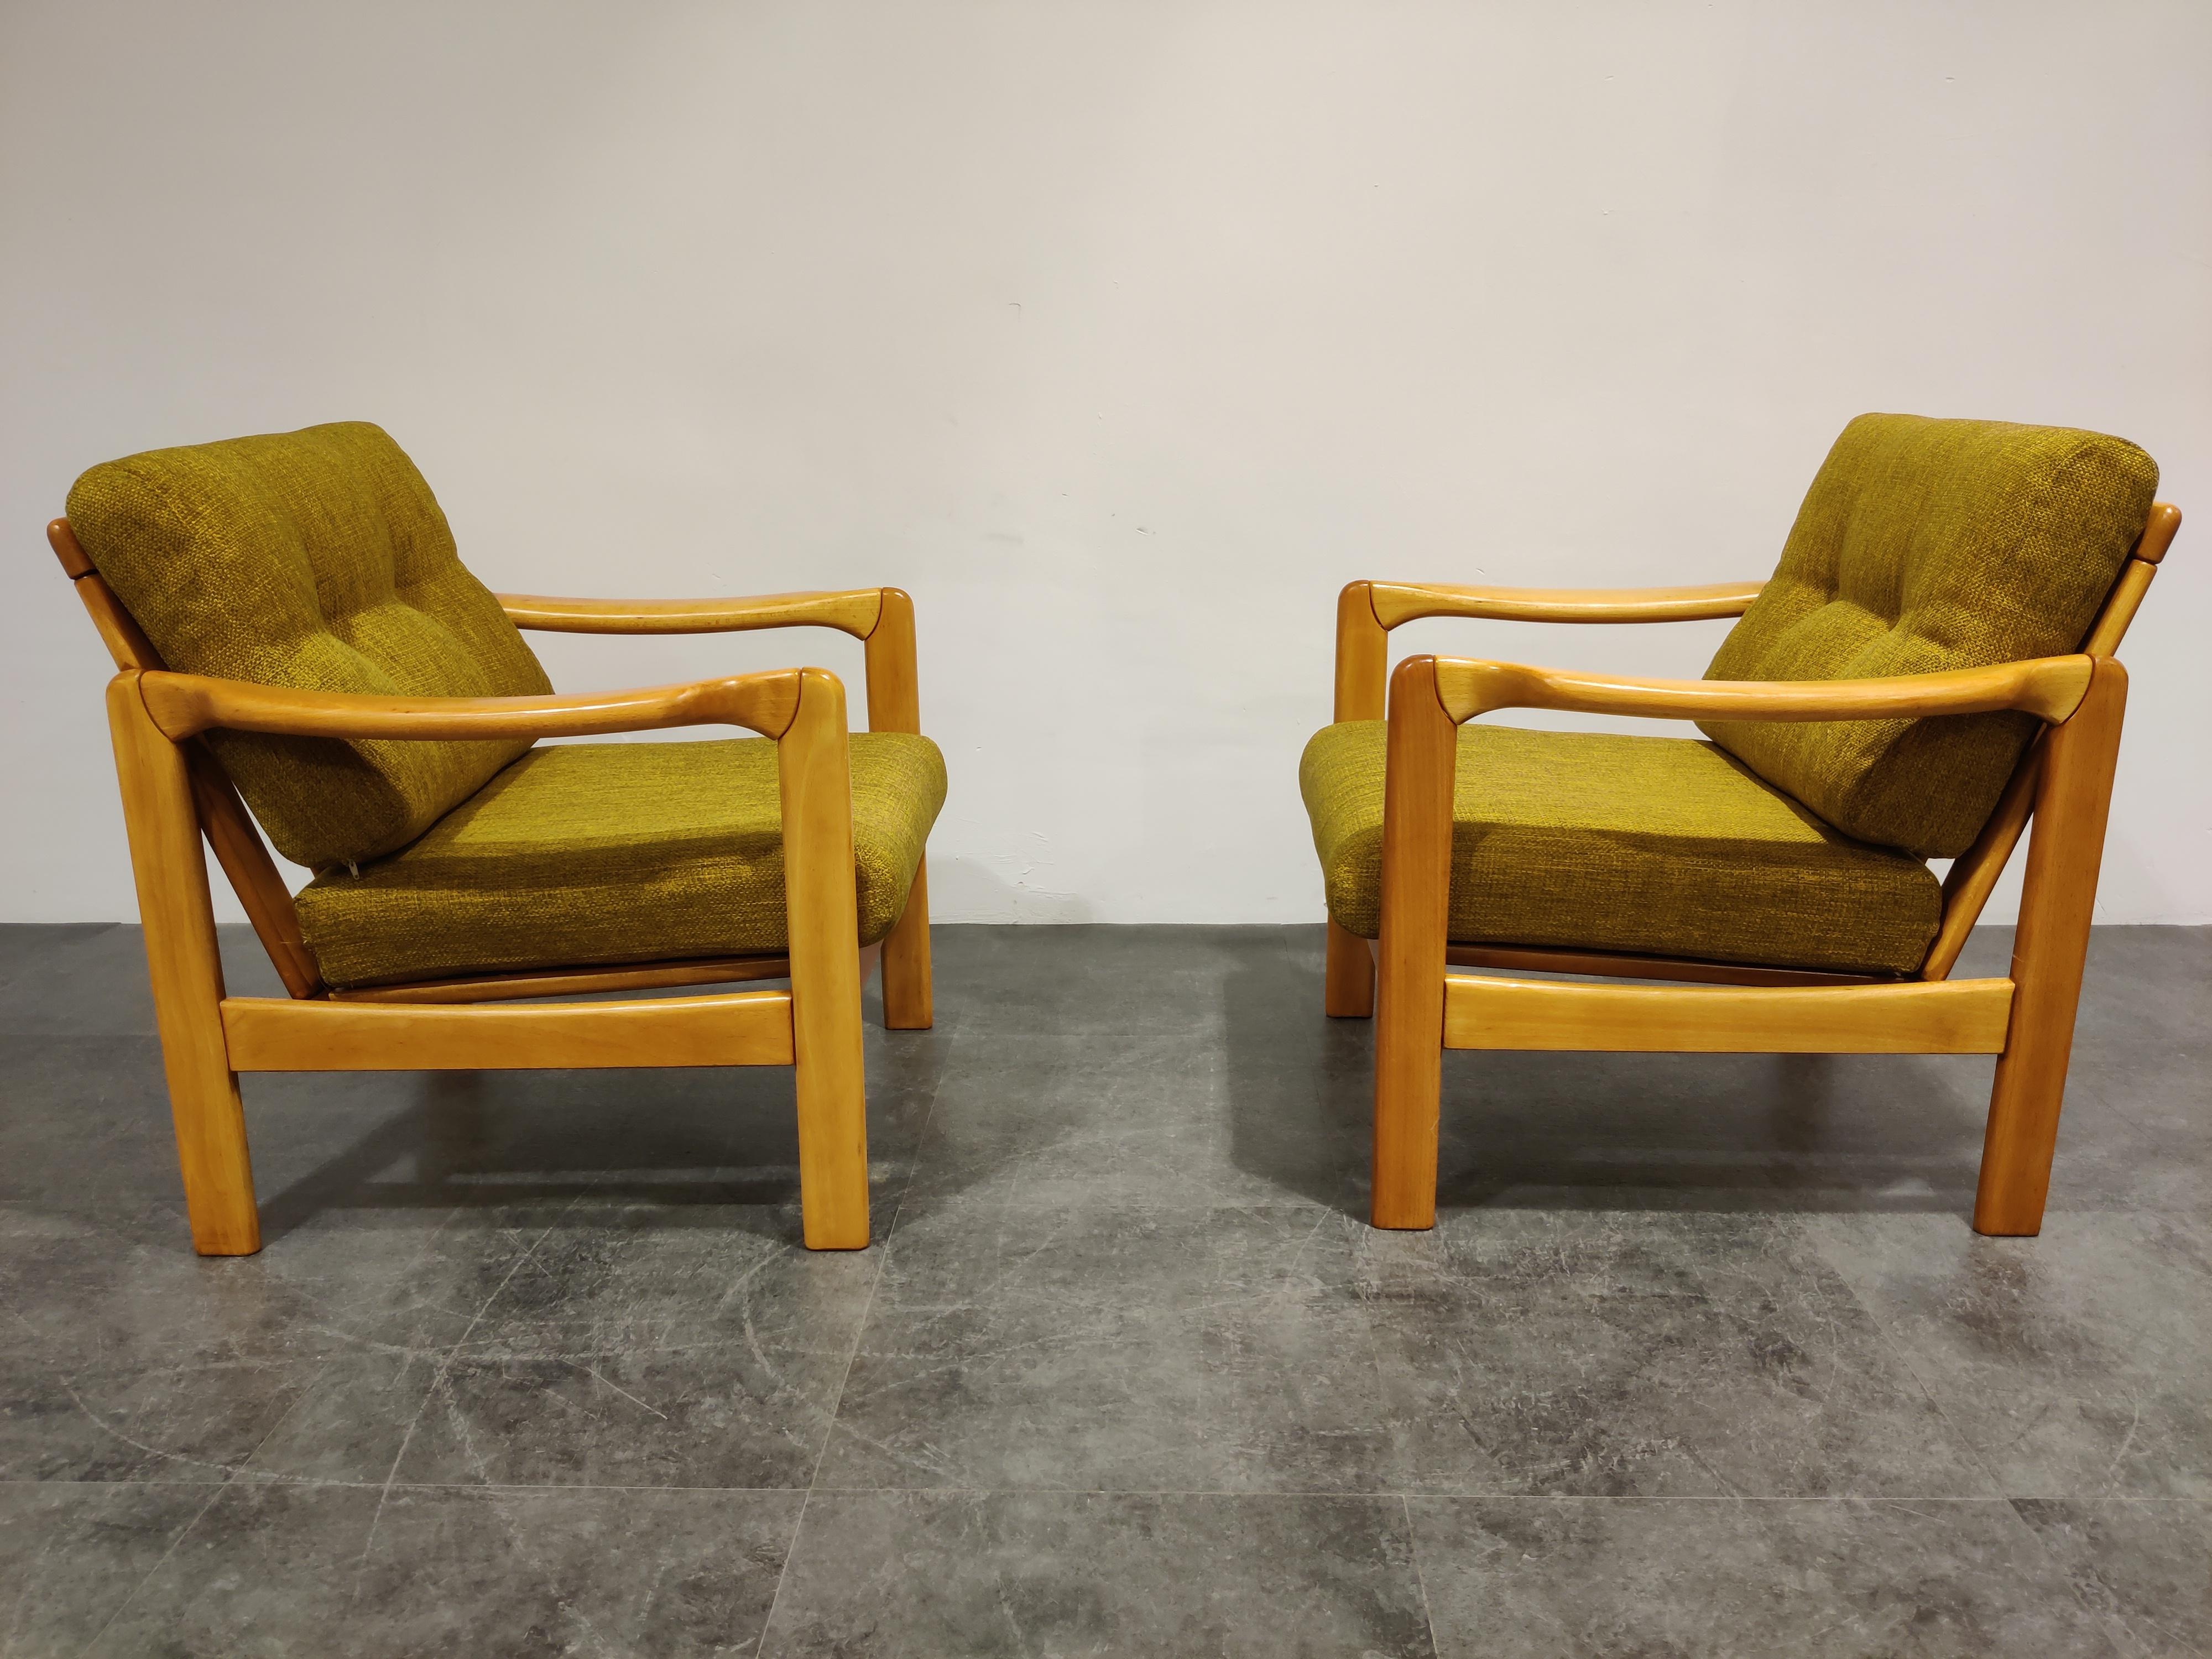 These elegant armchairs designed by Walter Knoll.

Beautifully crafted beech wooden frames with newly upholstered cushions in an olive green color.

Very good condition.

1960s - Germany

Measures: Height 79cm/31.10
Seat height